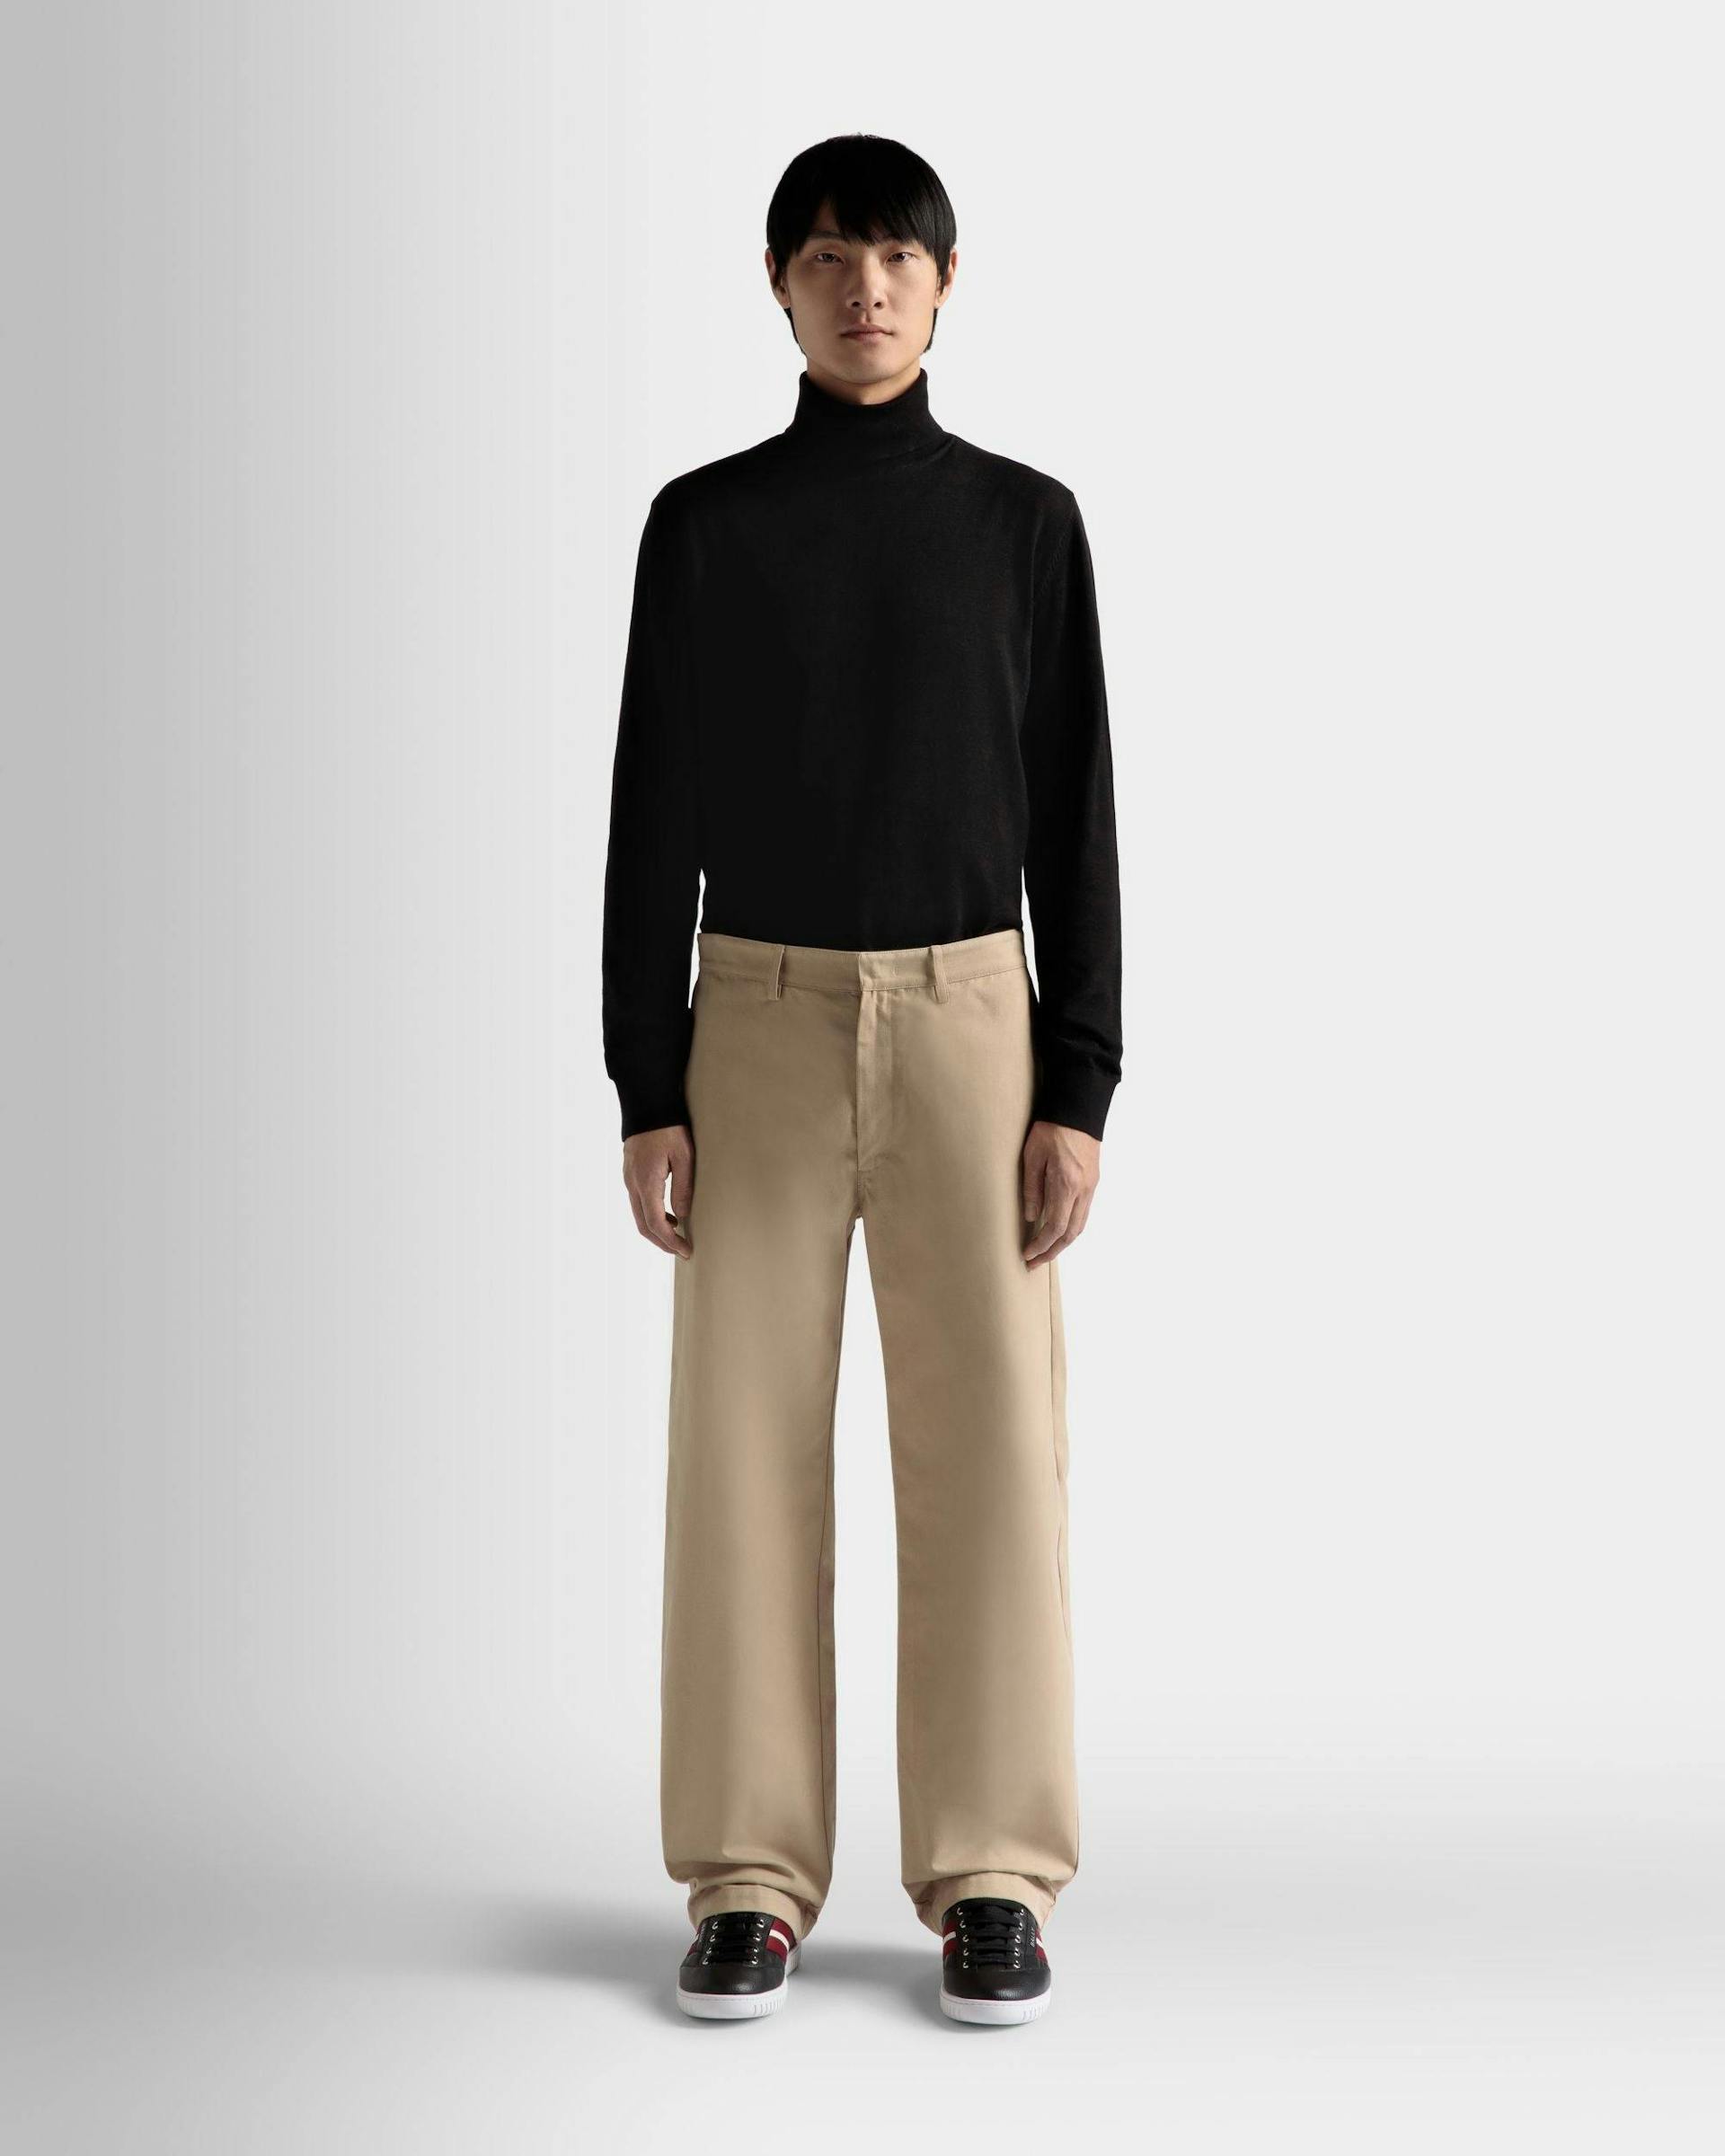 Men's Pants in Camel Cotton | Bally | On Model Front